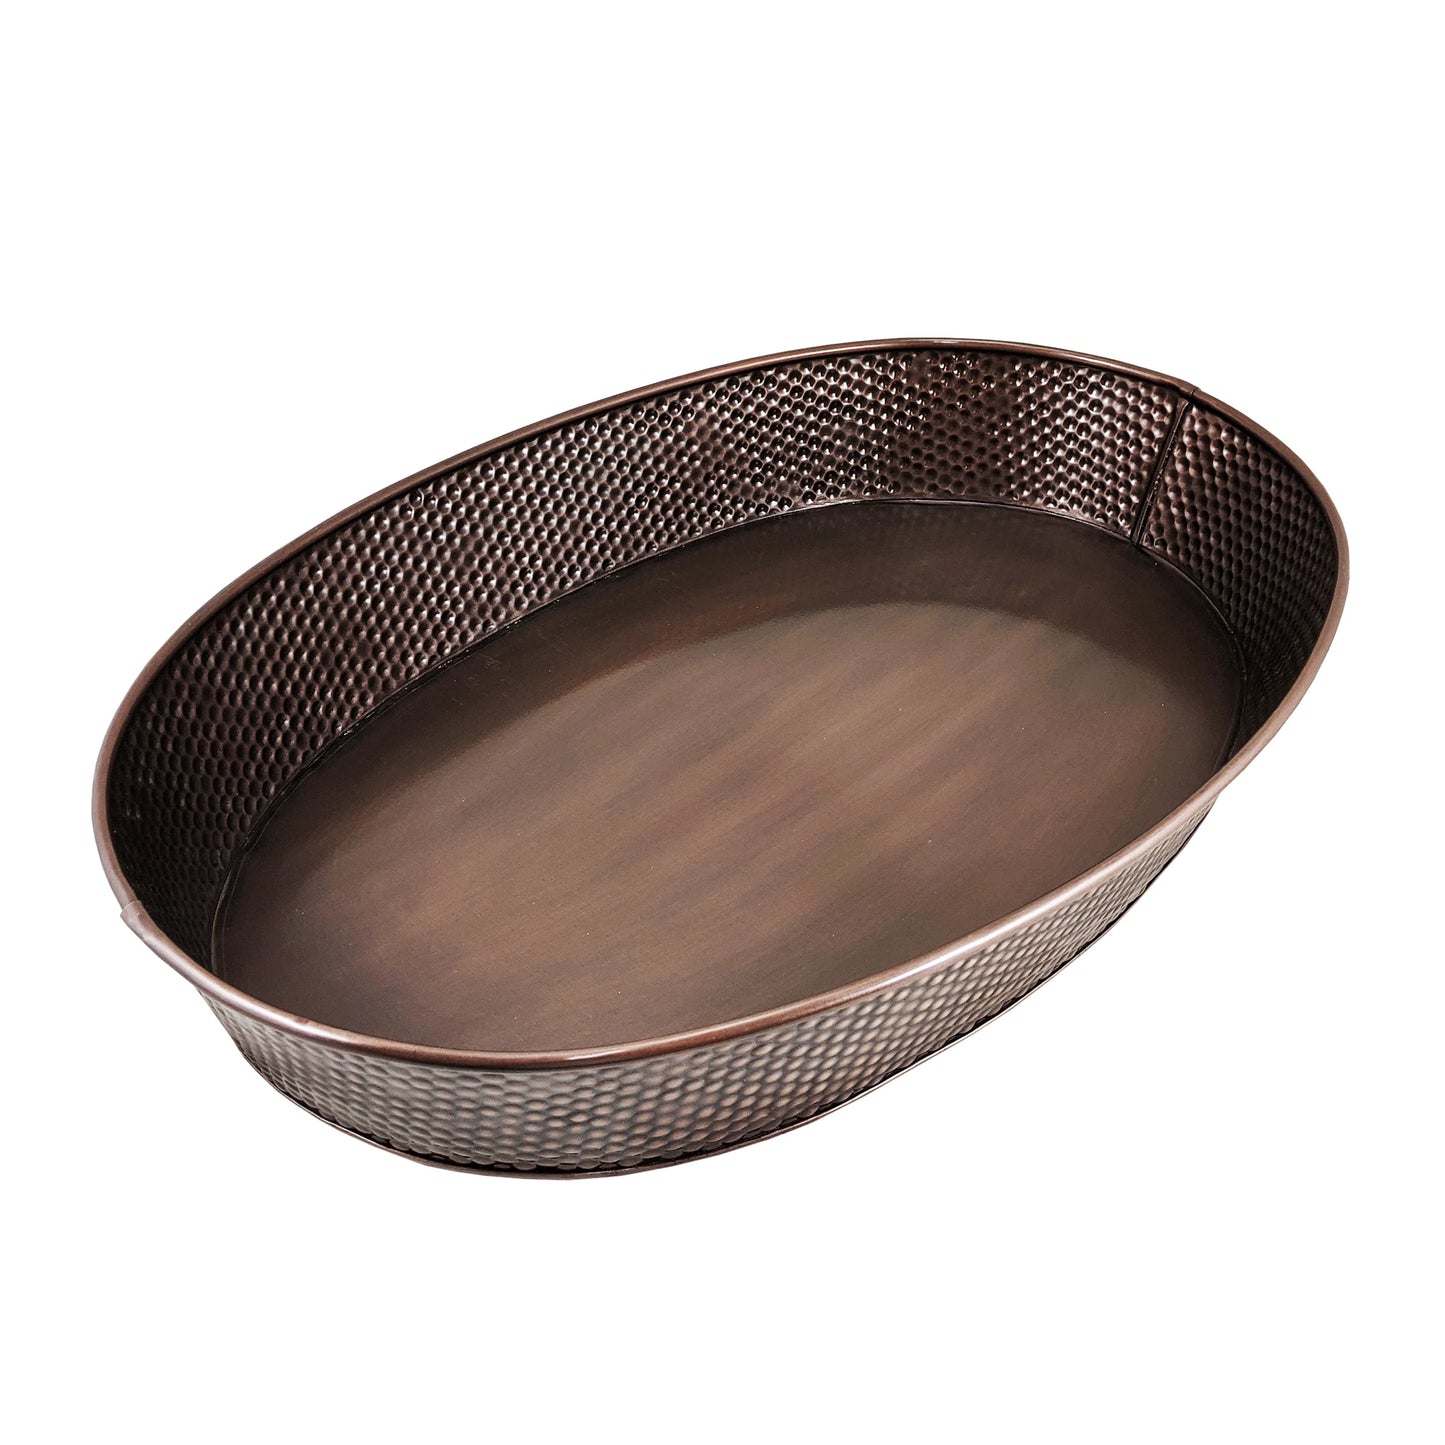 Oval party tray for serving food and drinks at a party in the home or in the restaurant.  Copper with hammered exterior for durability.